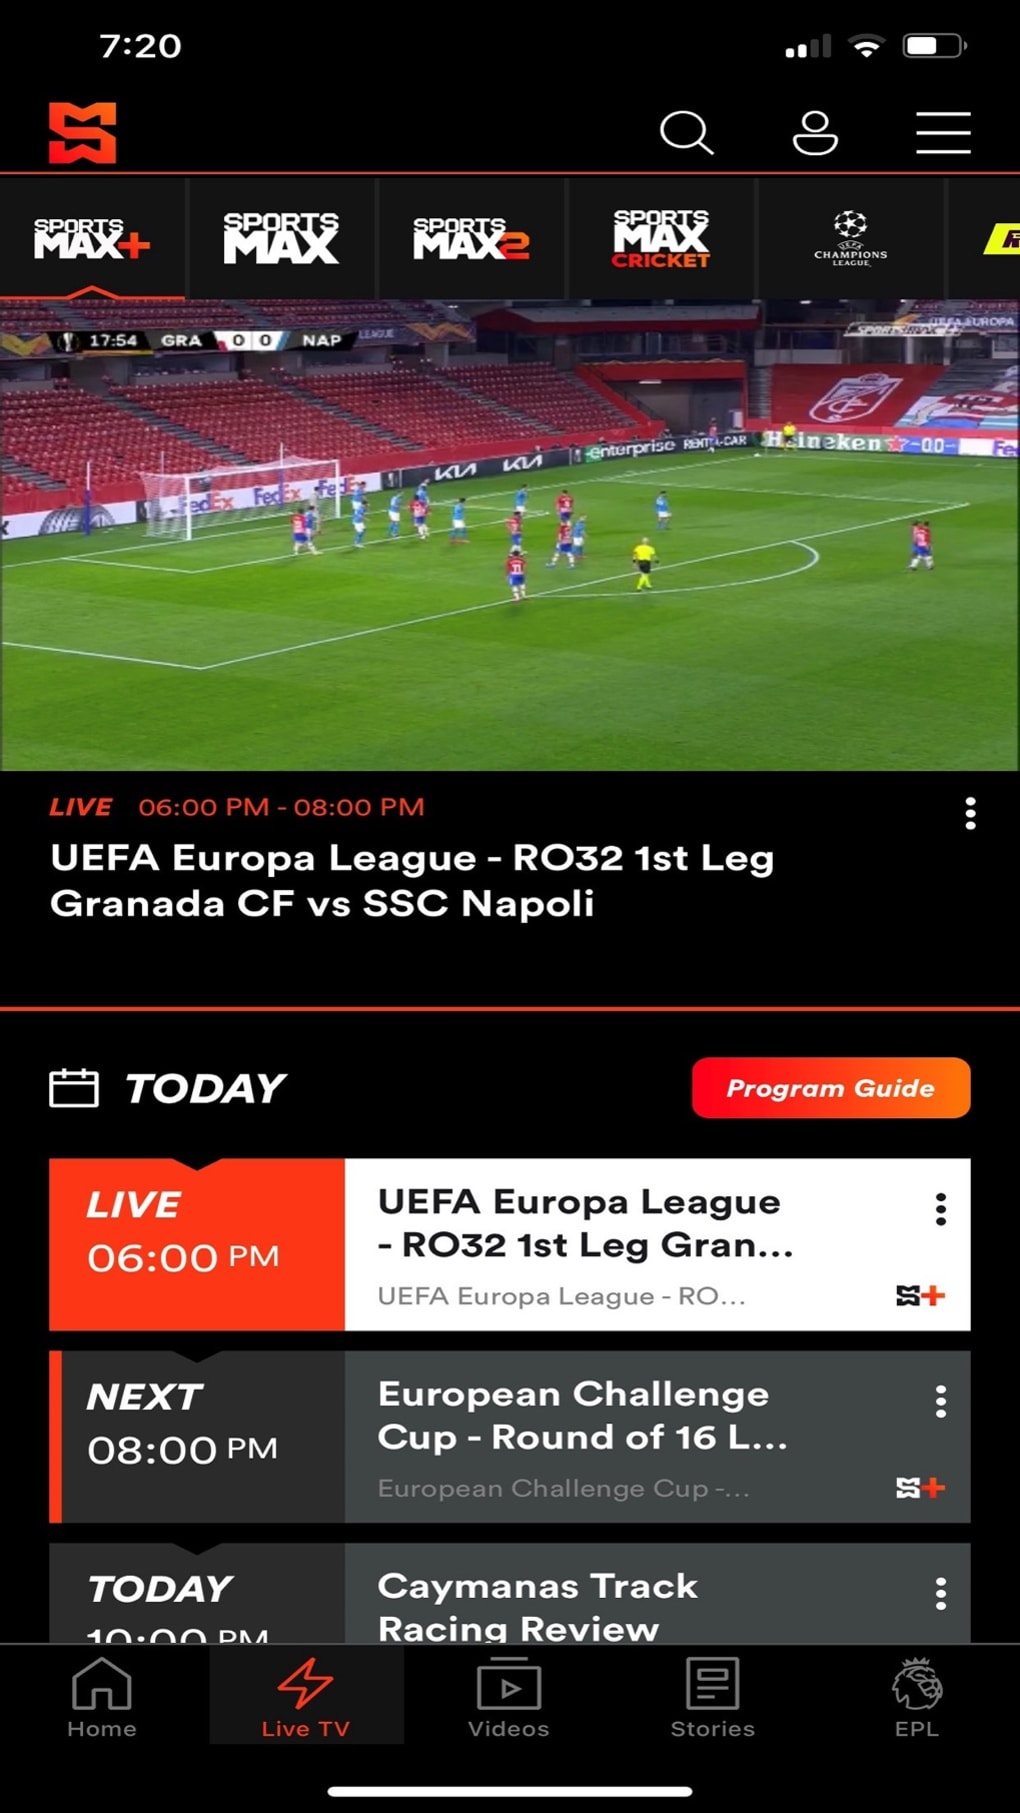 SportsMax for iPhone